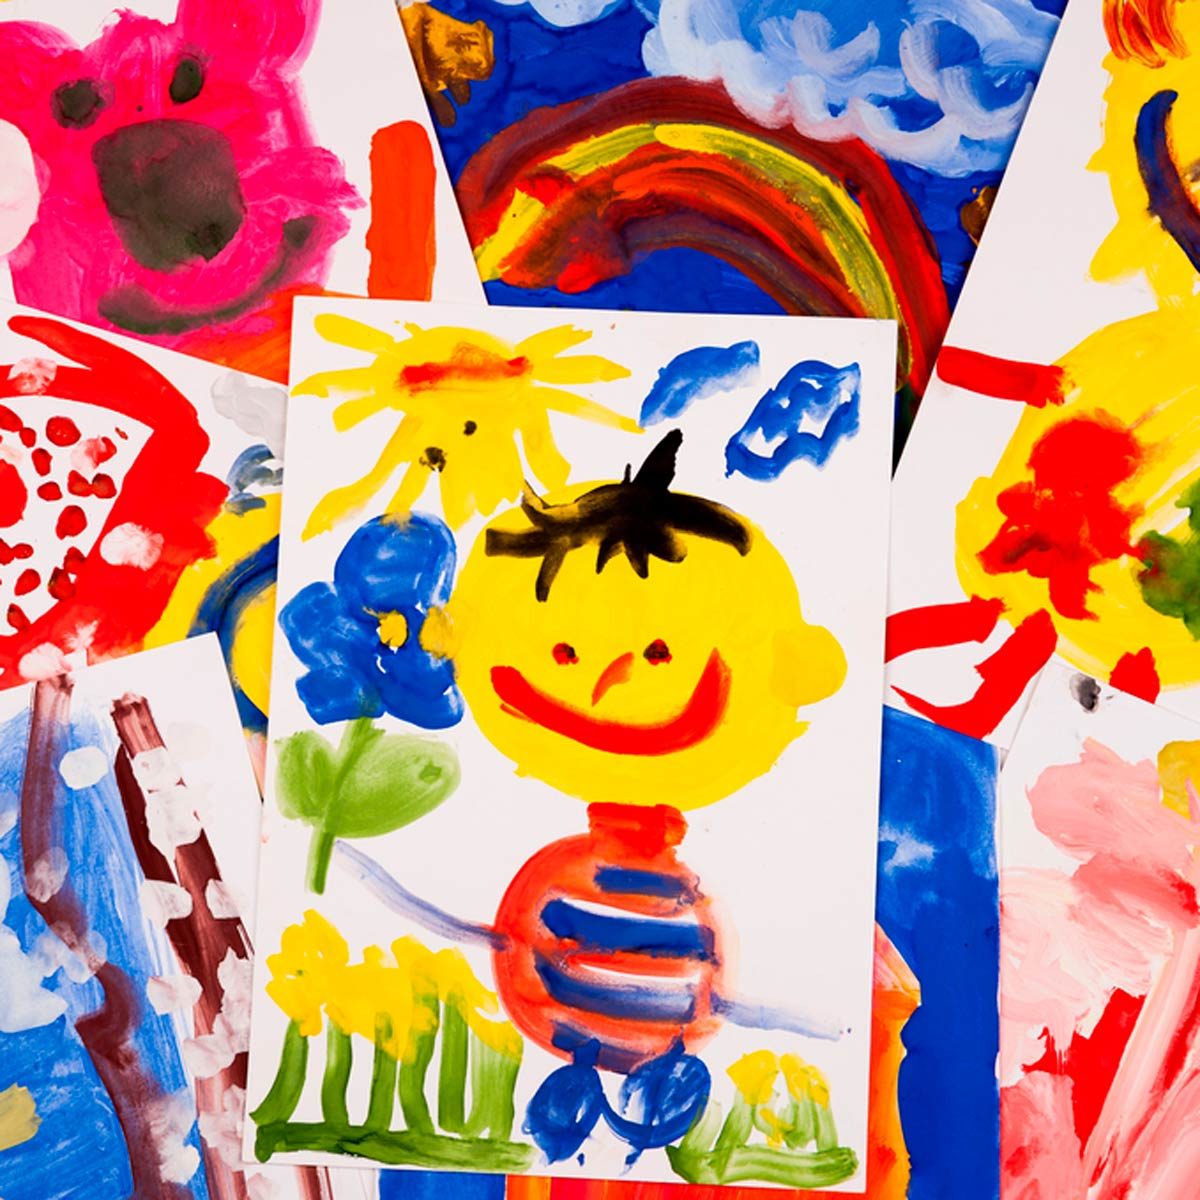 Immortalize Kids' Artwork Without Having to Actually Keep All of It